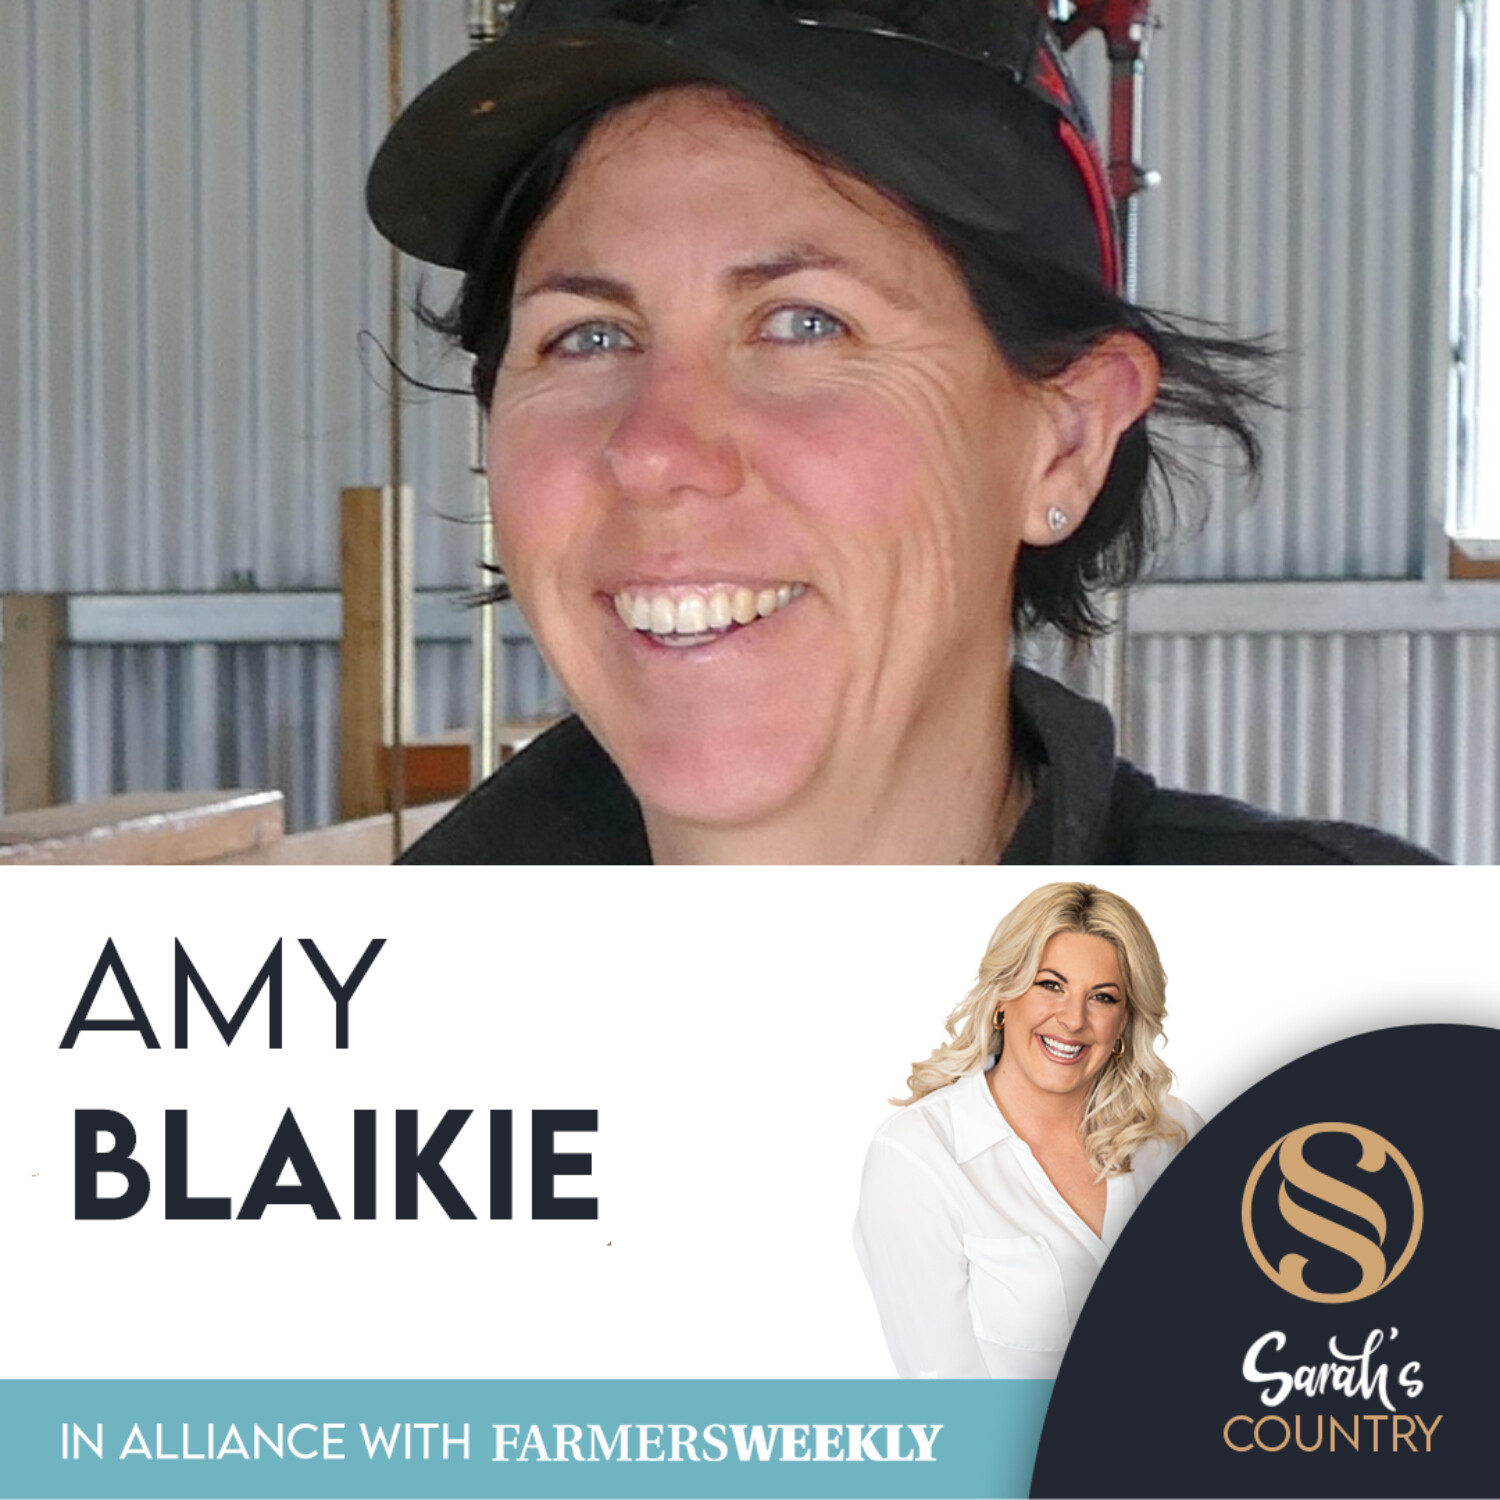 Amy Blaikie | “Final call for wool donations”